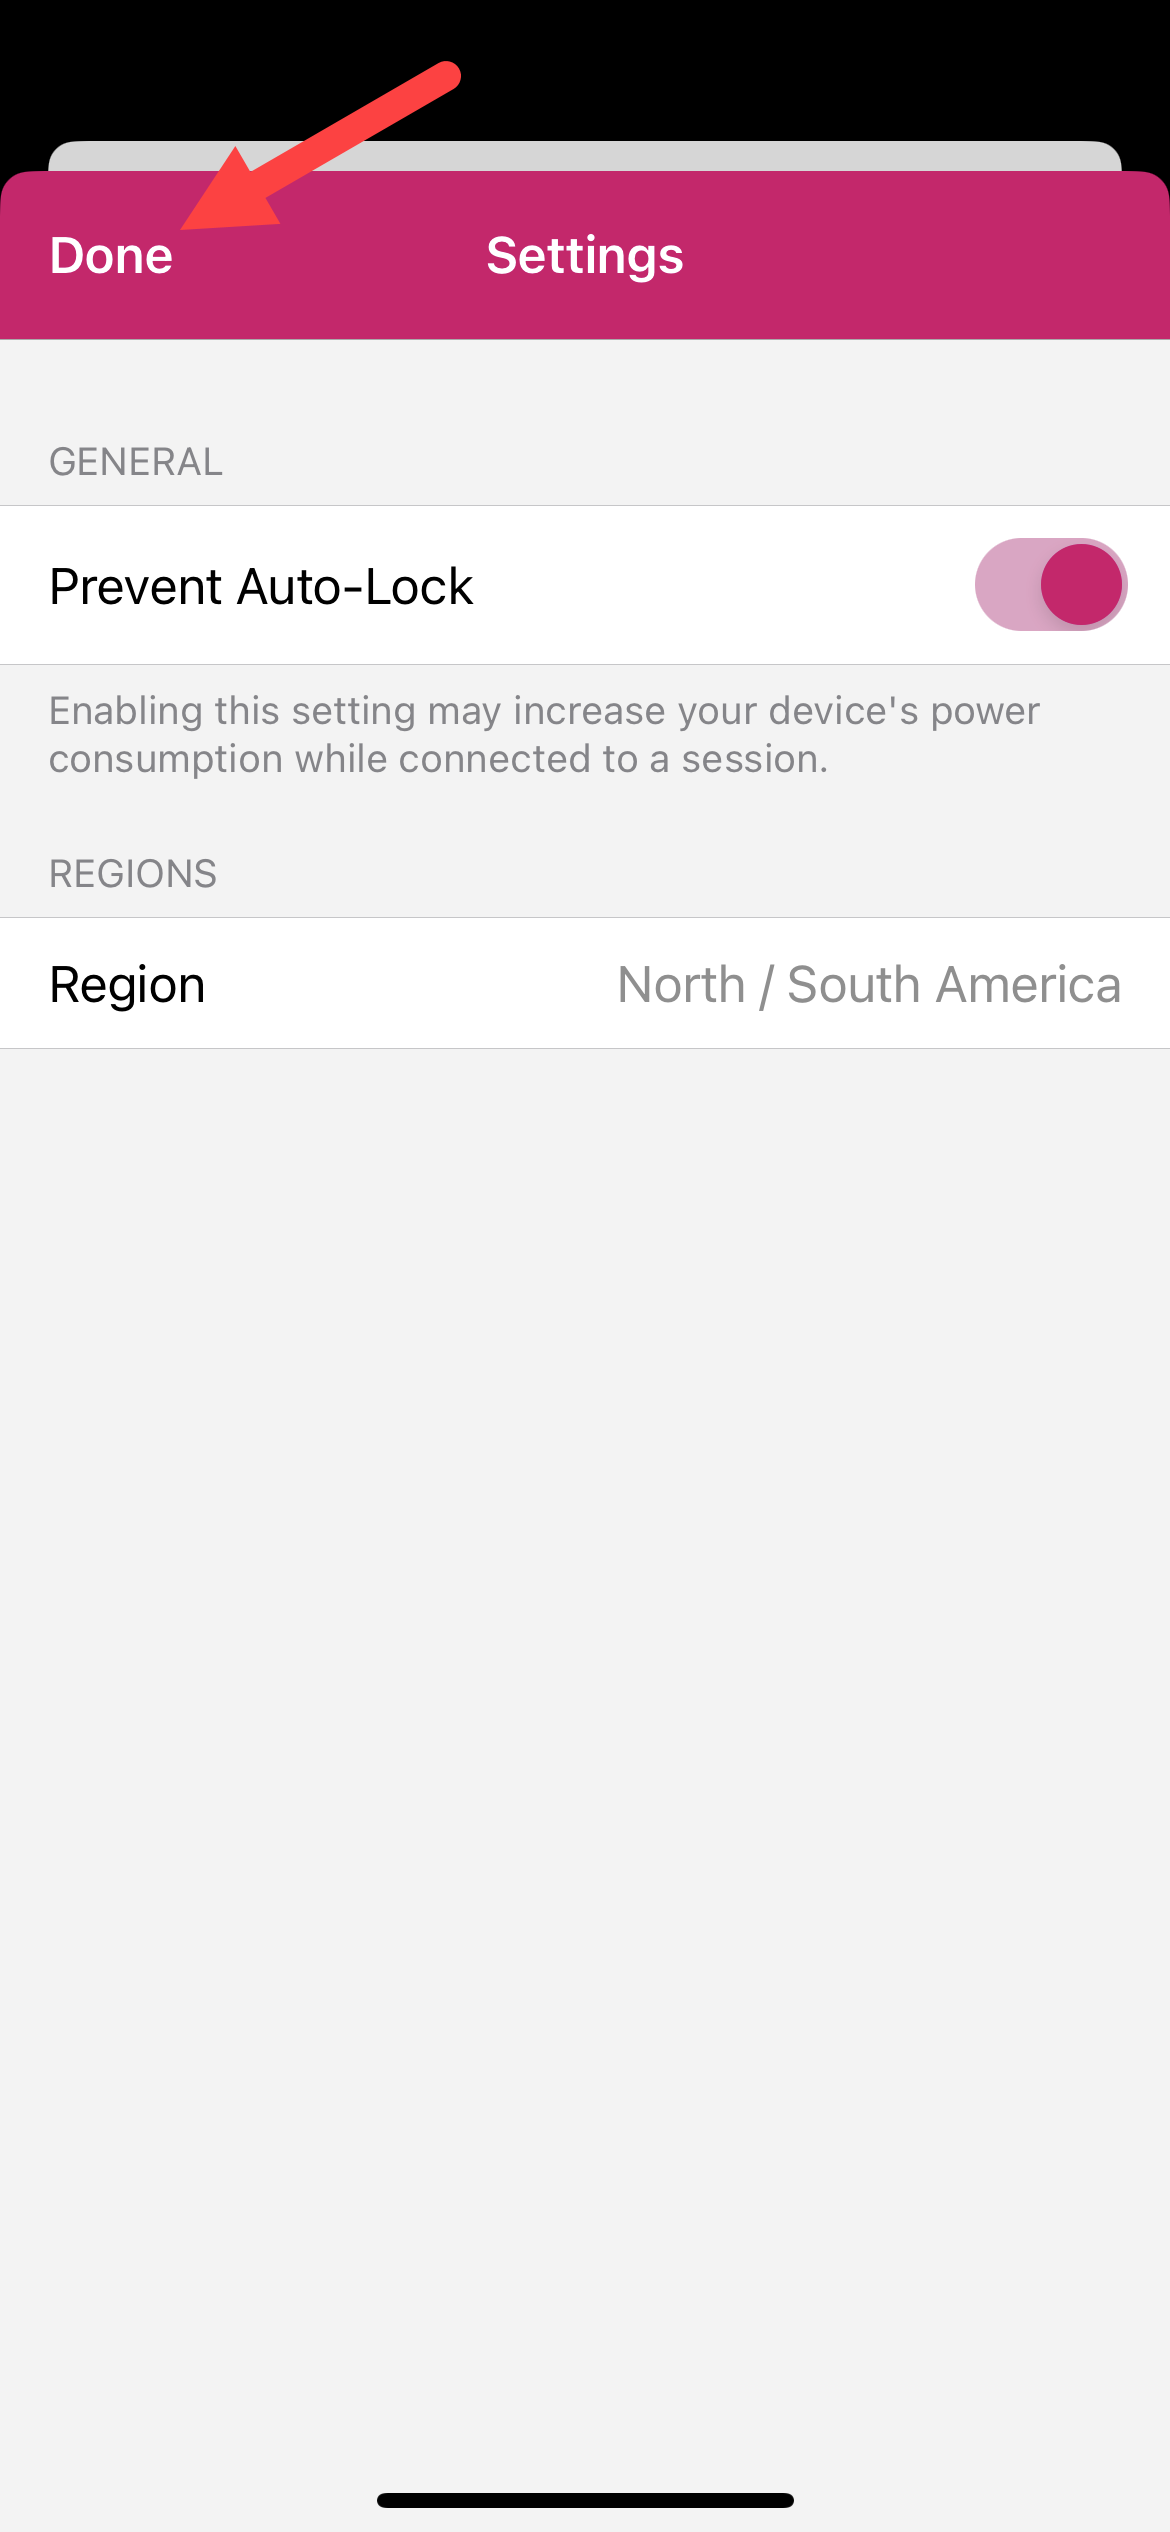 The PointSolutions Settings menu with Done identified as described for iOS